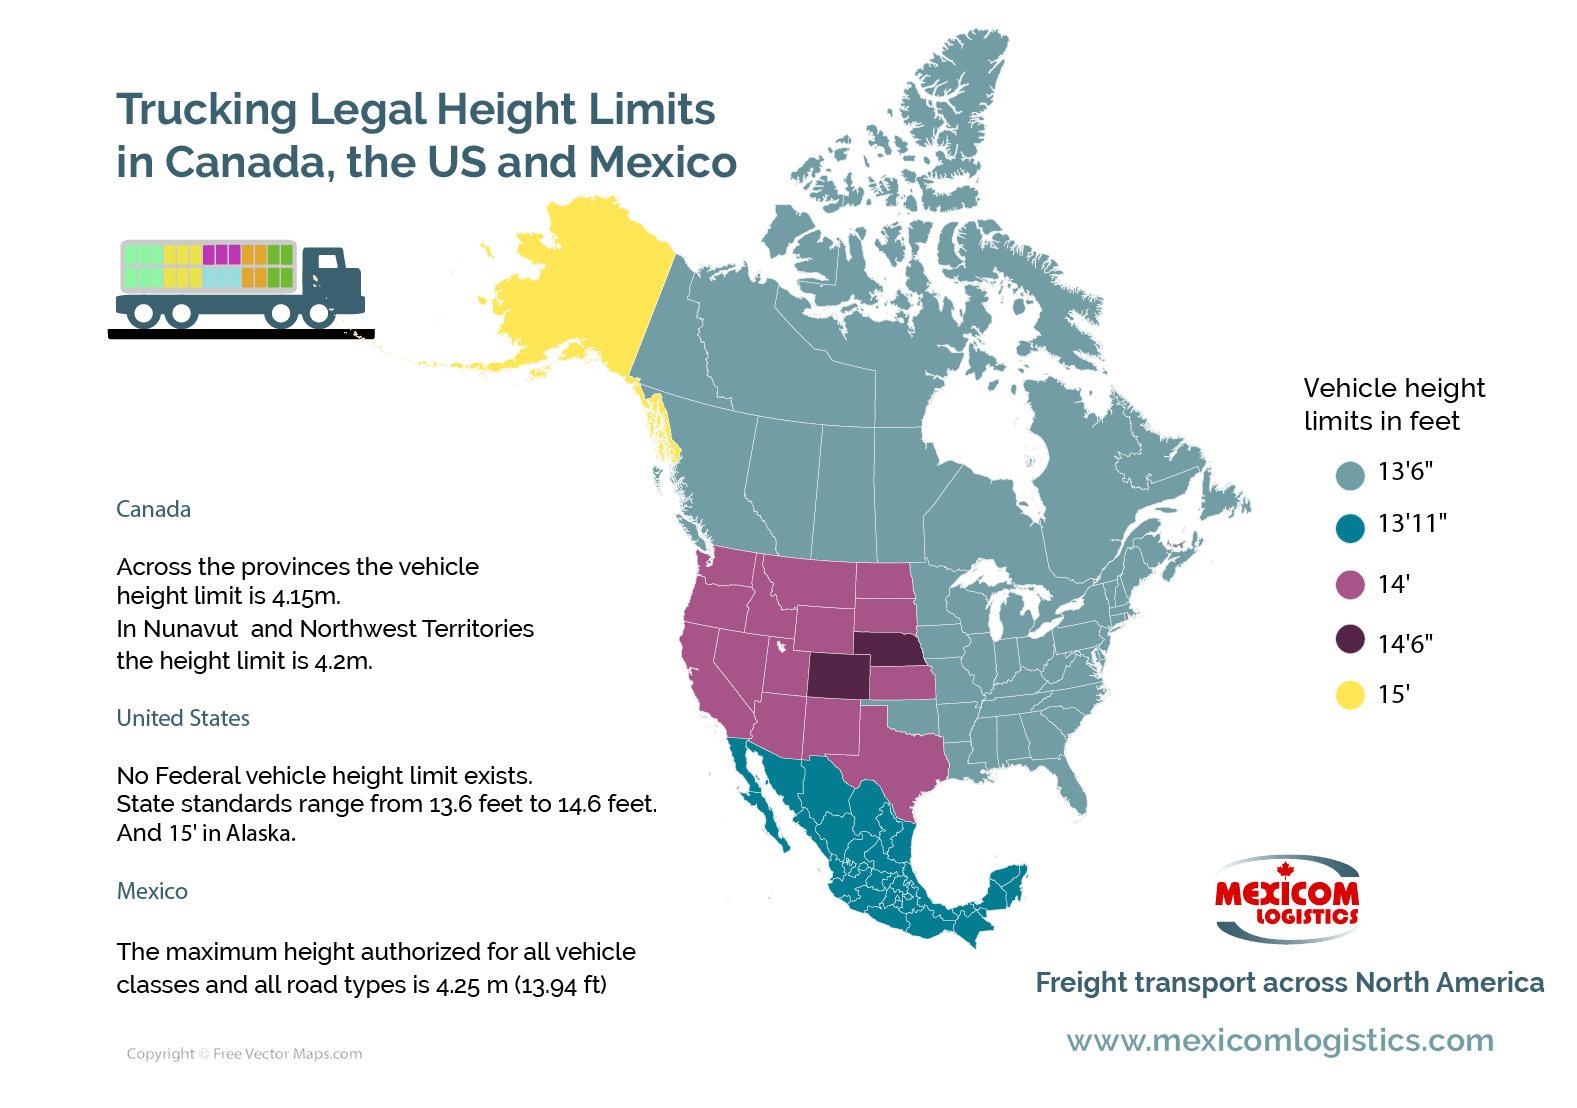 Trucking Legal Height Limits in Canada, the US and Mexico. 